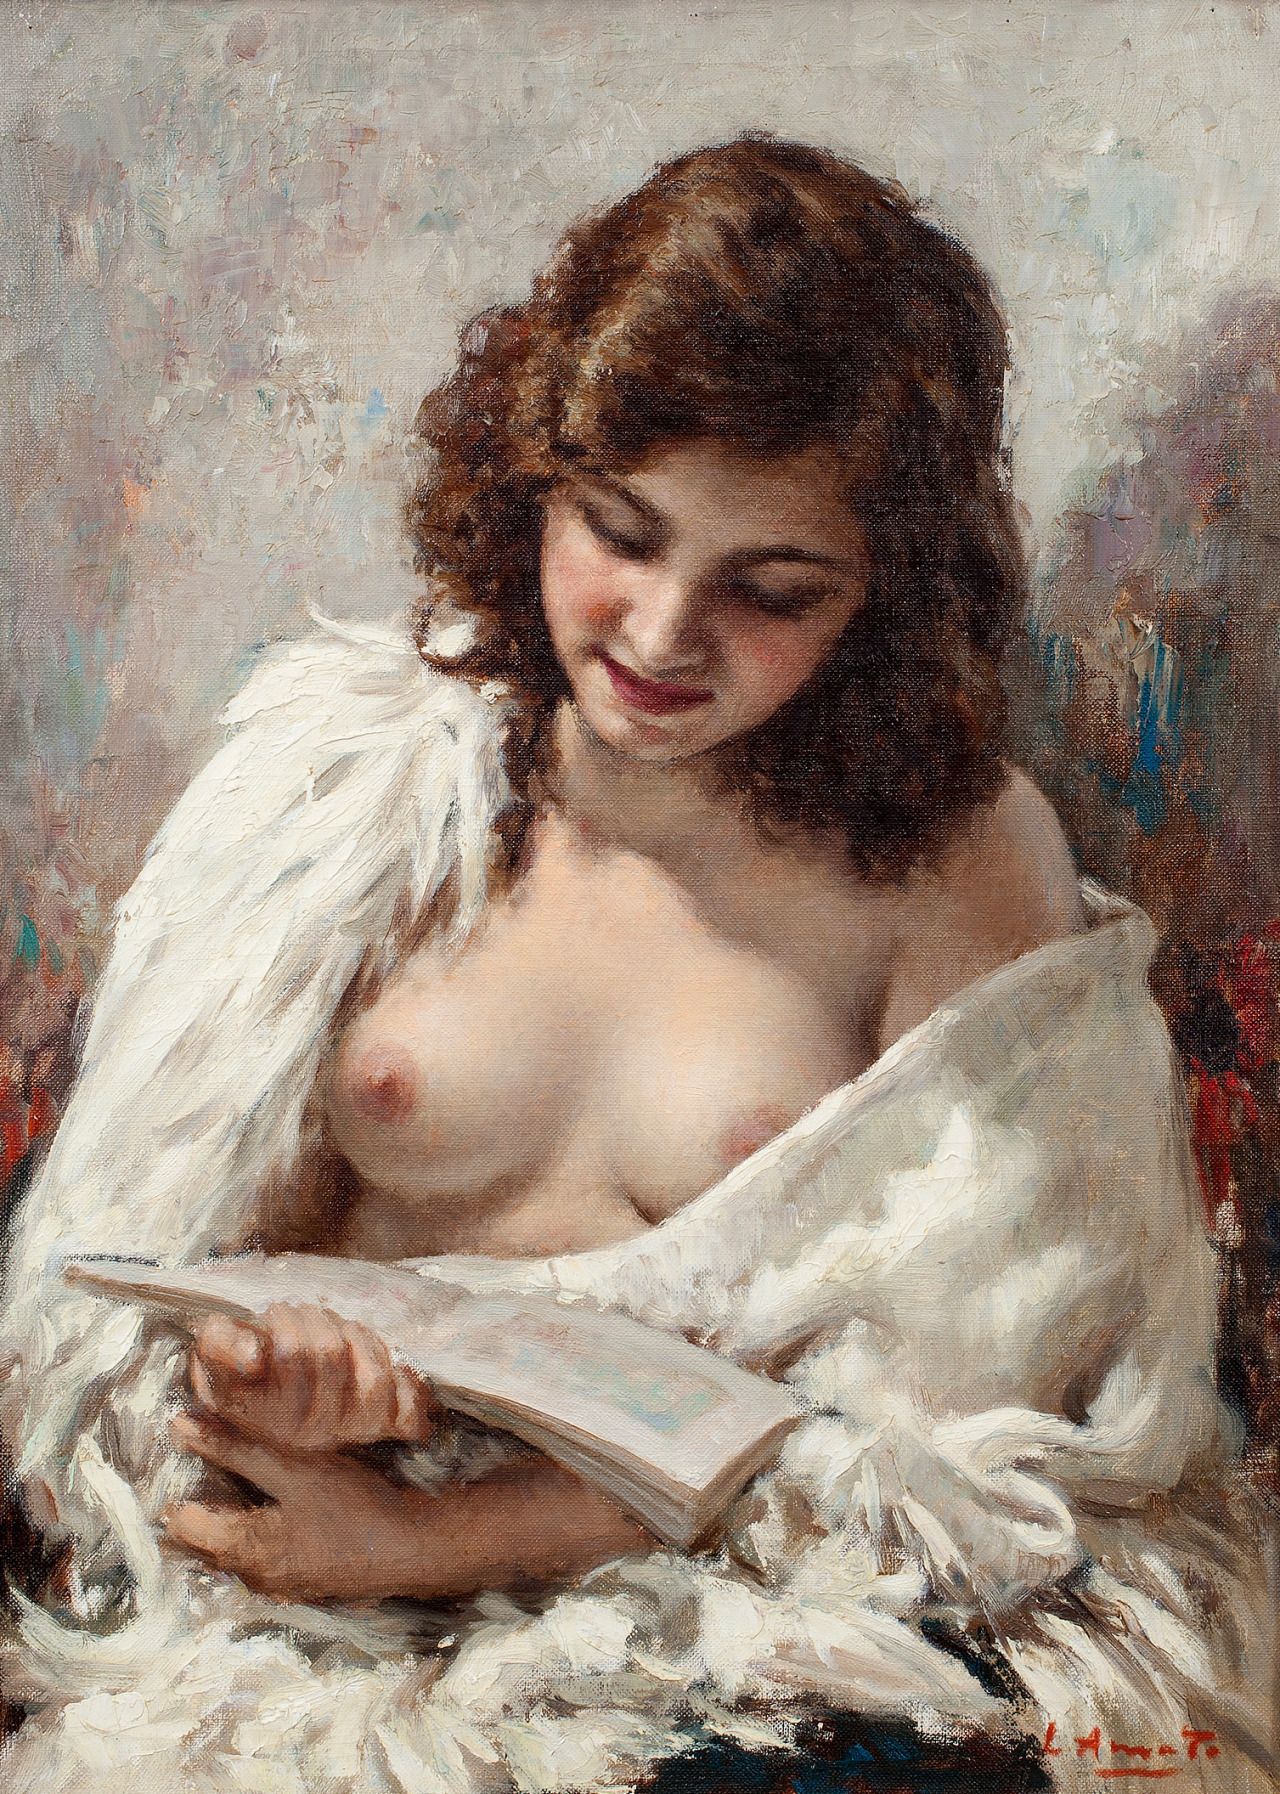 Girl Reading. Luigi Amato (Italian,1898-1961).
“When the Day of Judgment dawns and people, great and small, come marching in to receive their heavenly rewards, the Almighty will gaze upon the mere bookworms and say to Peter, “Look, these need no...